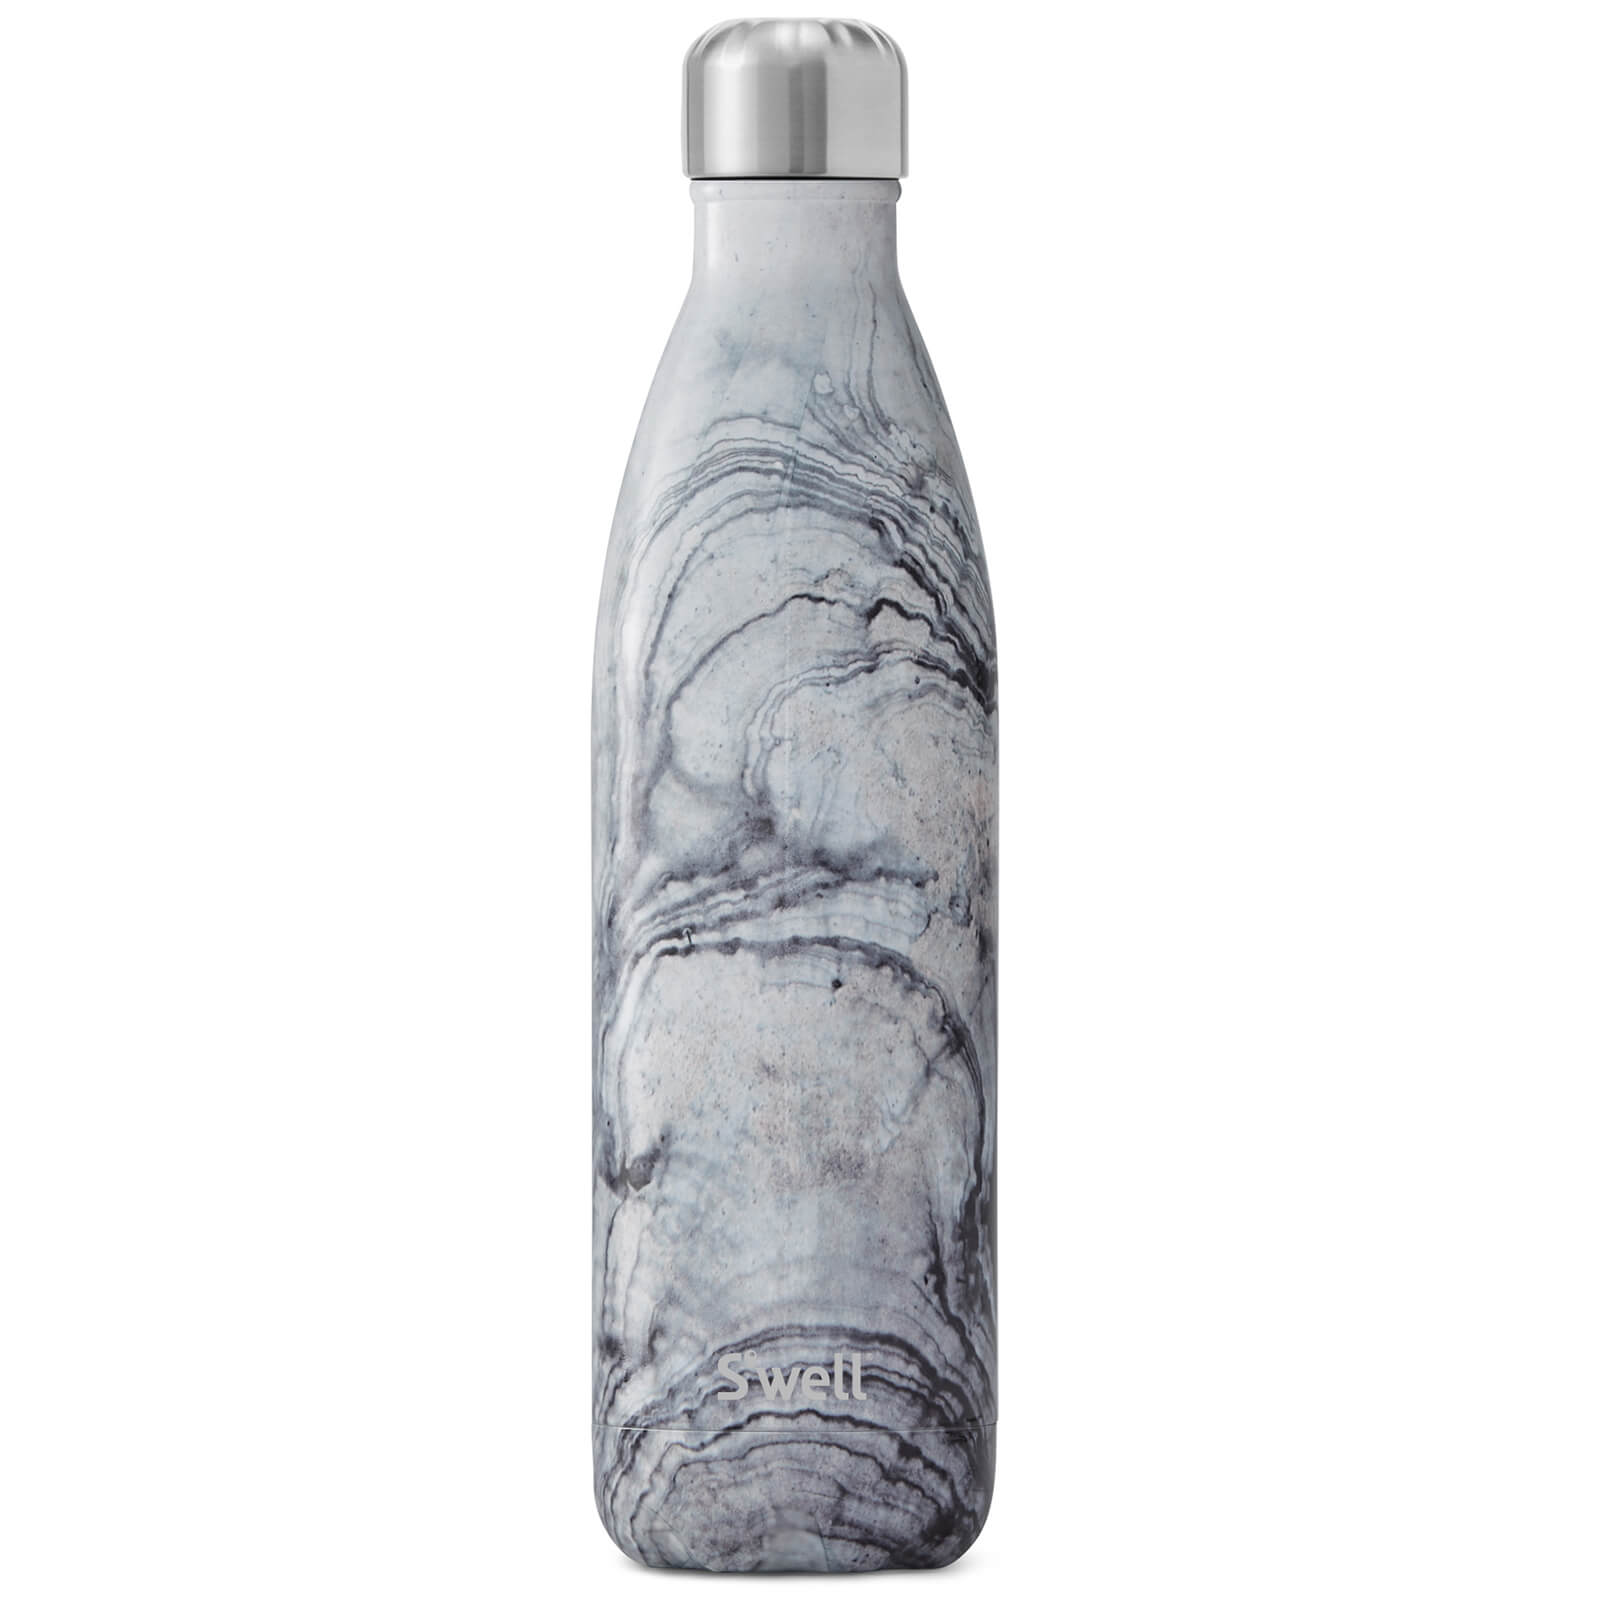 S Well Sandstone Water Bottle 750ml Free Uk Delivery Available